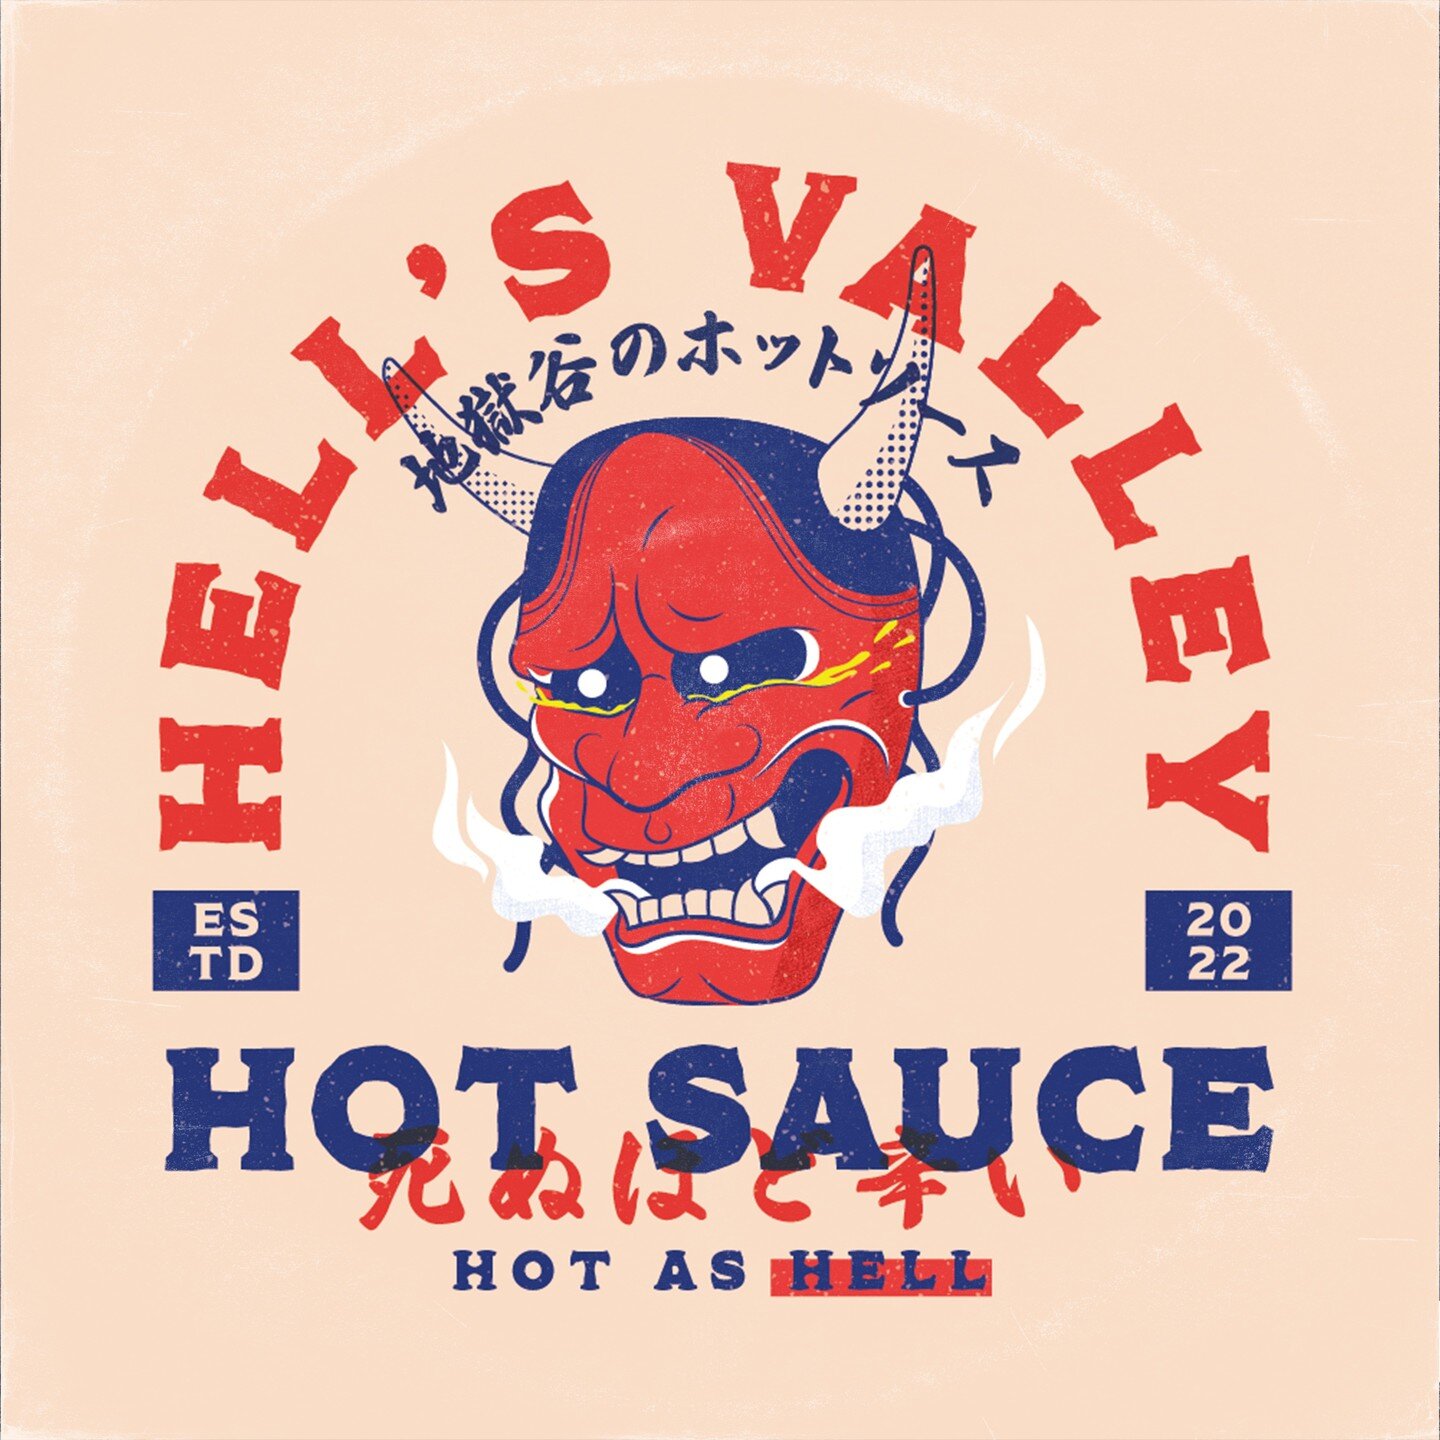 Fuck it, let's start posting branding and logos on here then. 

HELL'S VALLEY HOT SAUCE / 地獄谷のホットソース